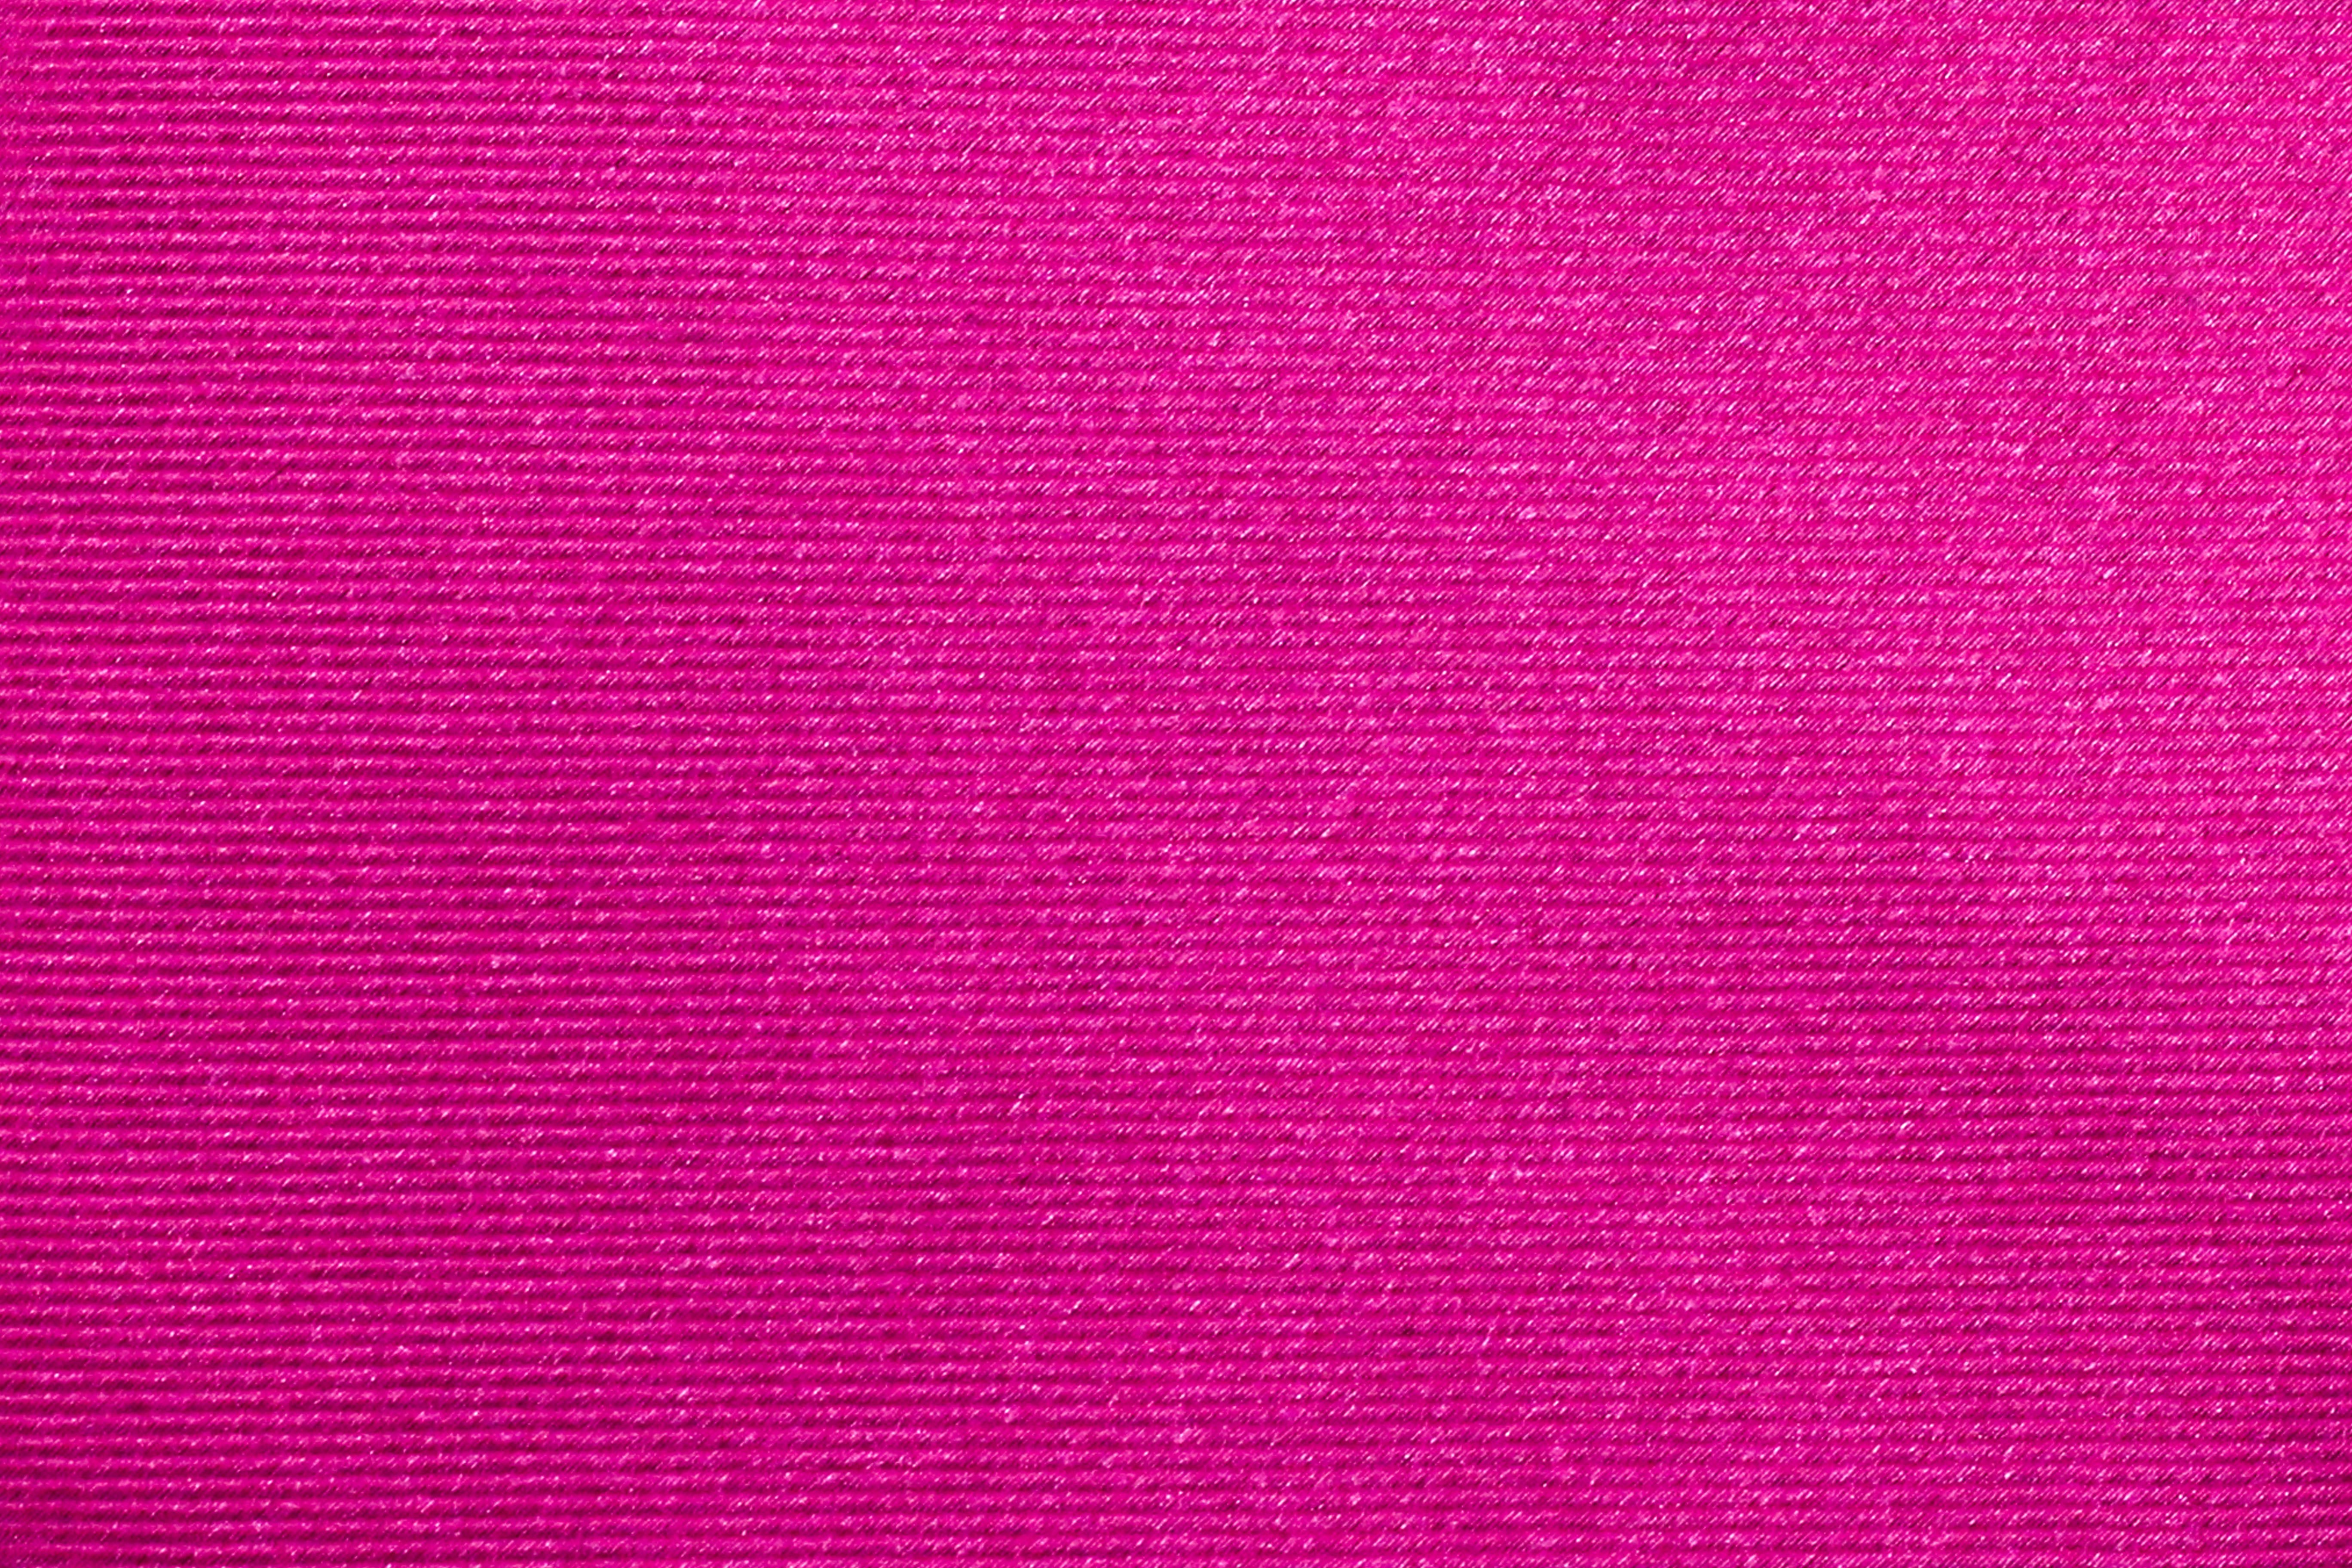 100% Silk Extra Long Solid Fuchsia Pink Tie - Long Tie Store